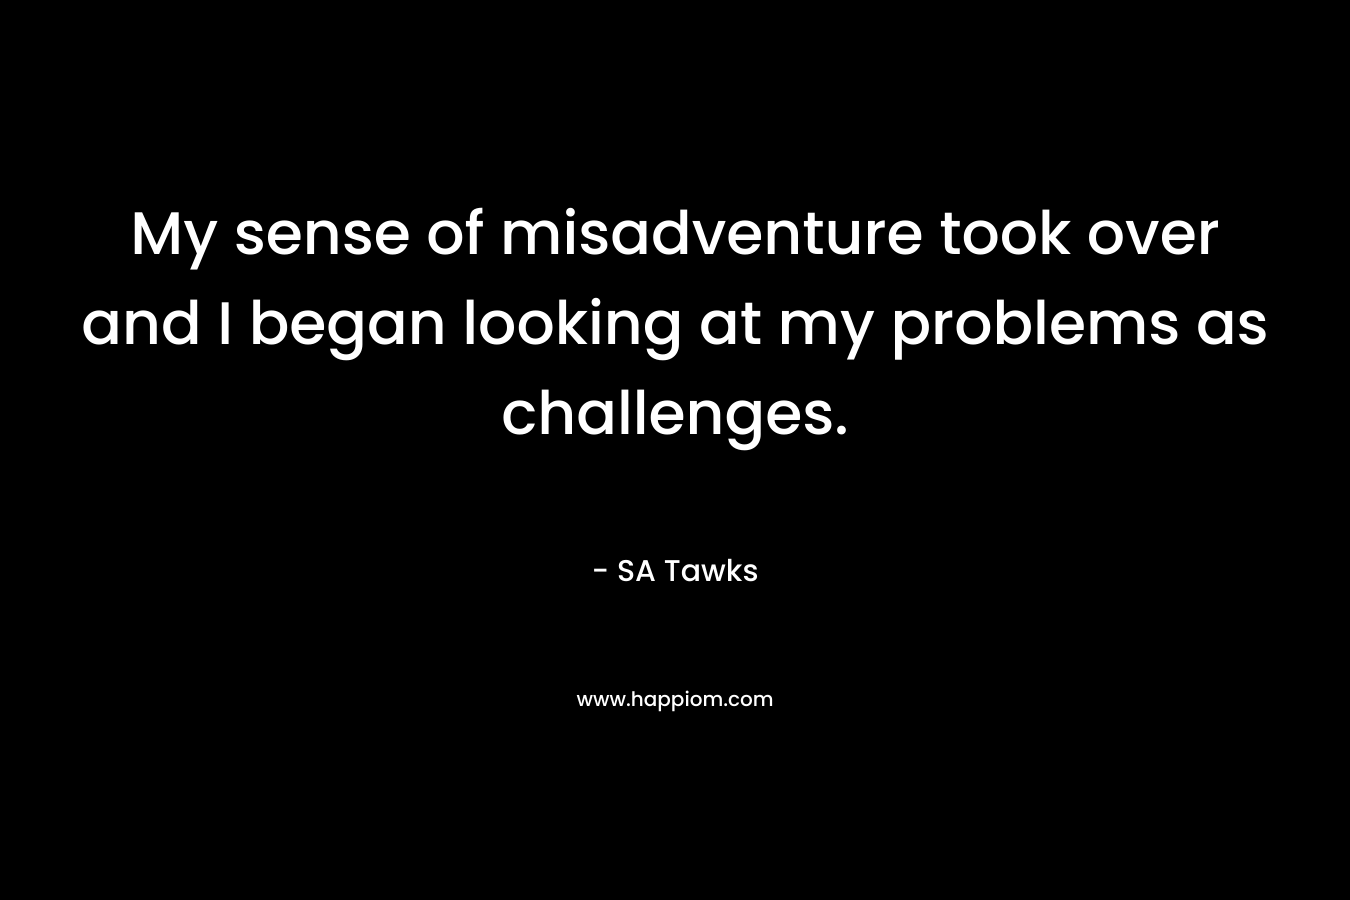 My sense of misadventure took over and I began looking at my problems as challenges. – SA Tawks